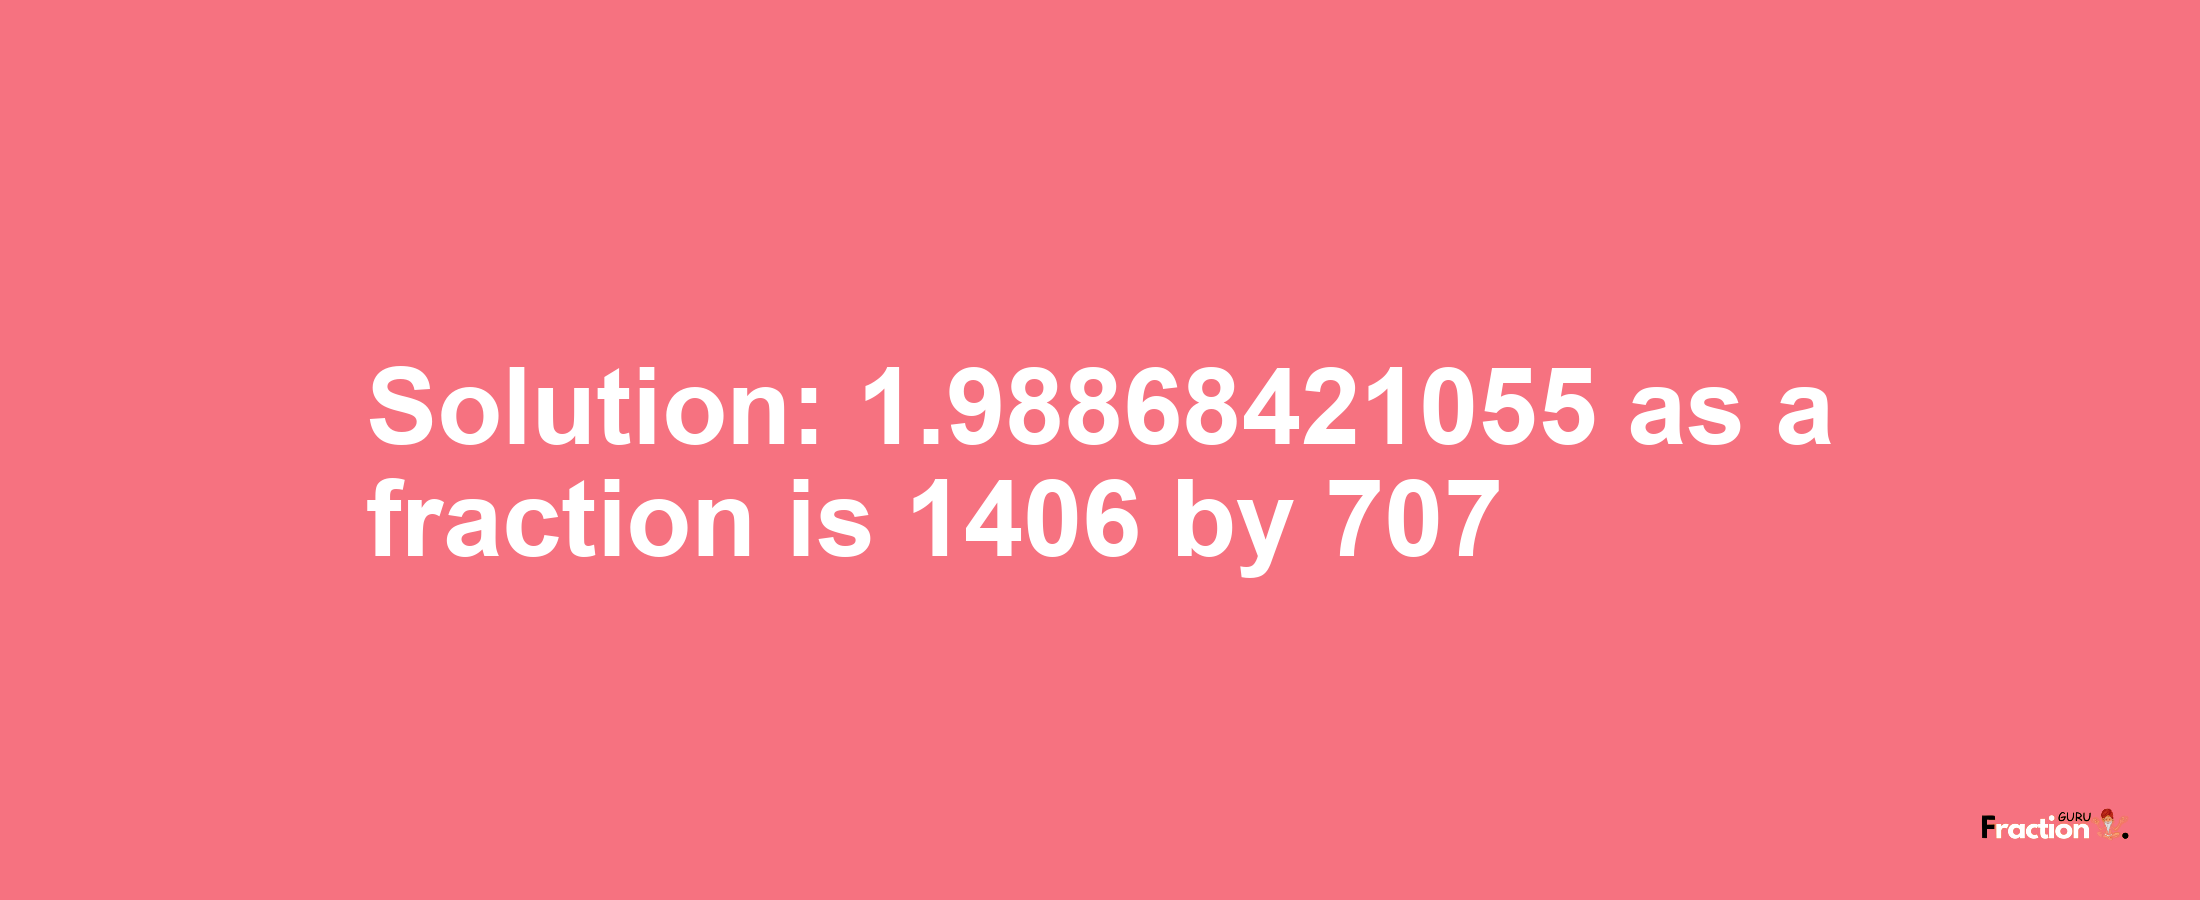 Solution:1.98868421055 as a fraction is 1406/707